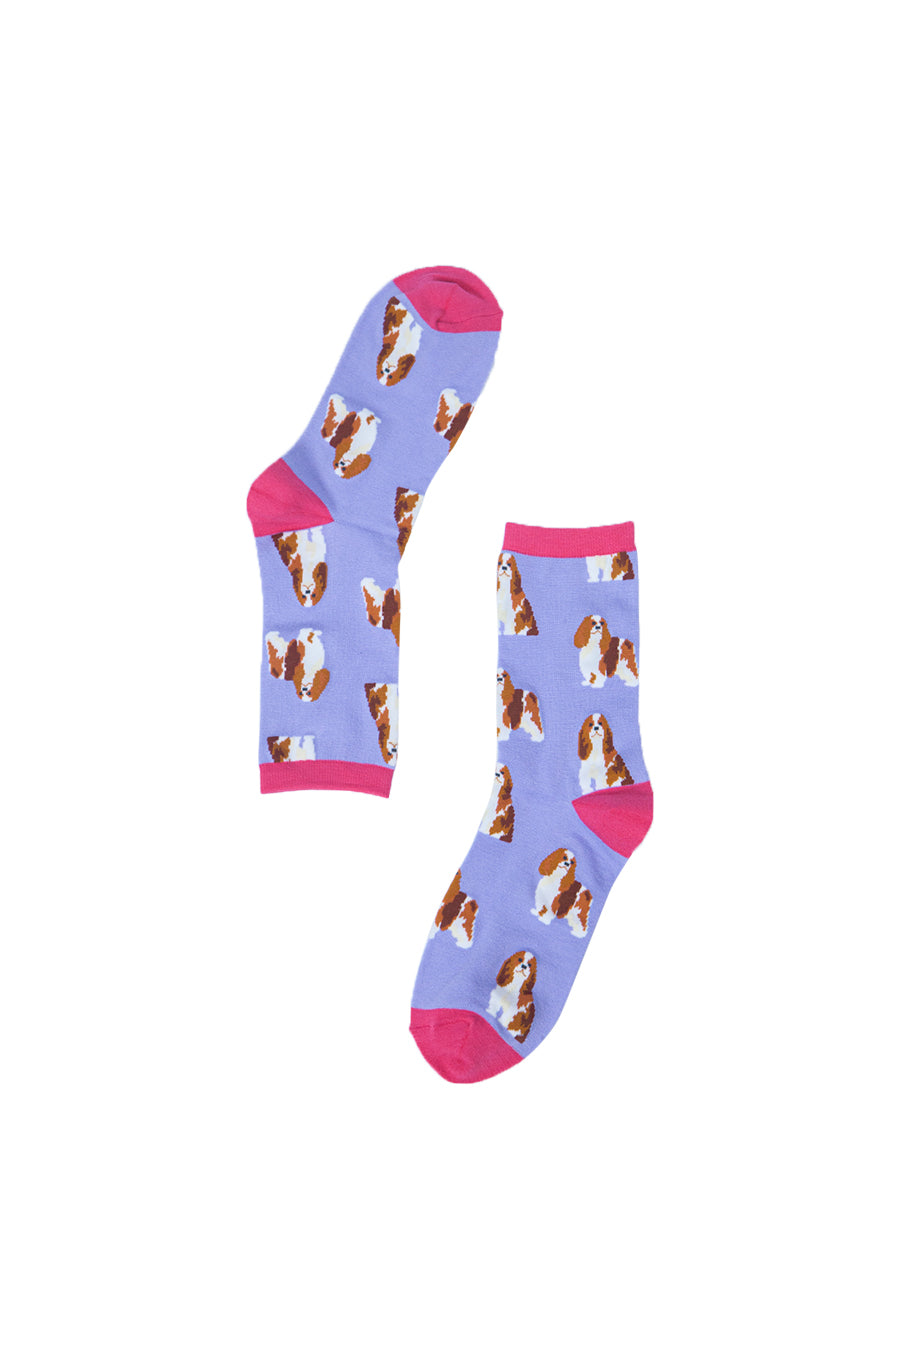 lilac bamboo socks with cavalier spaniels